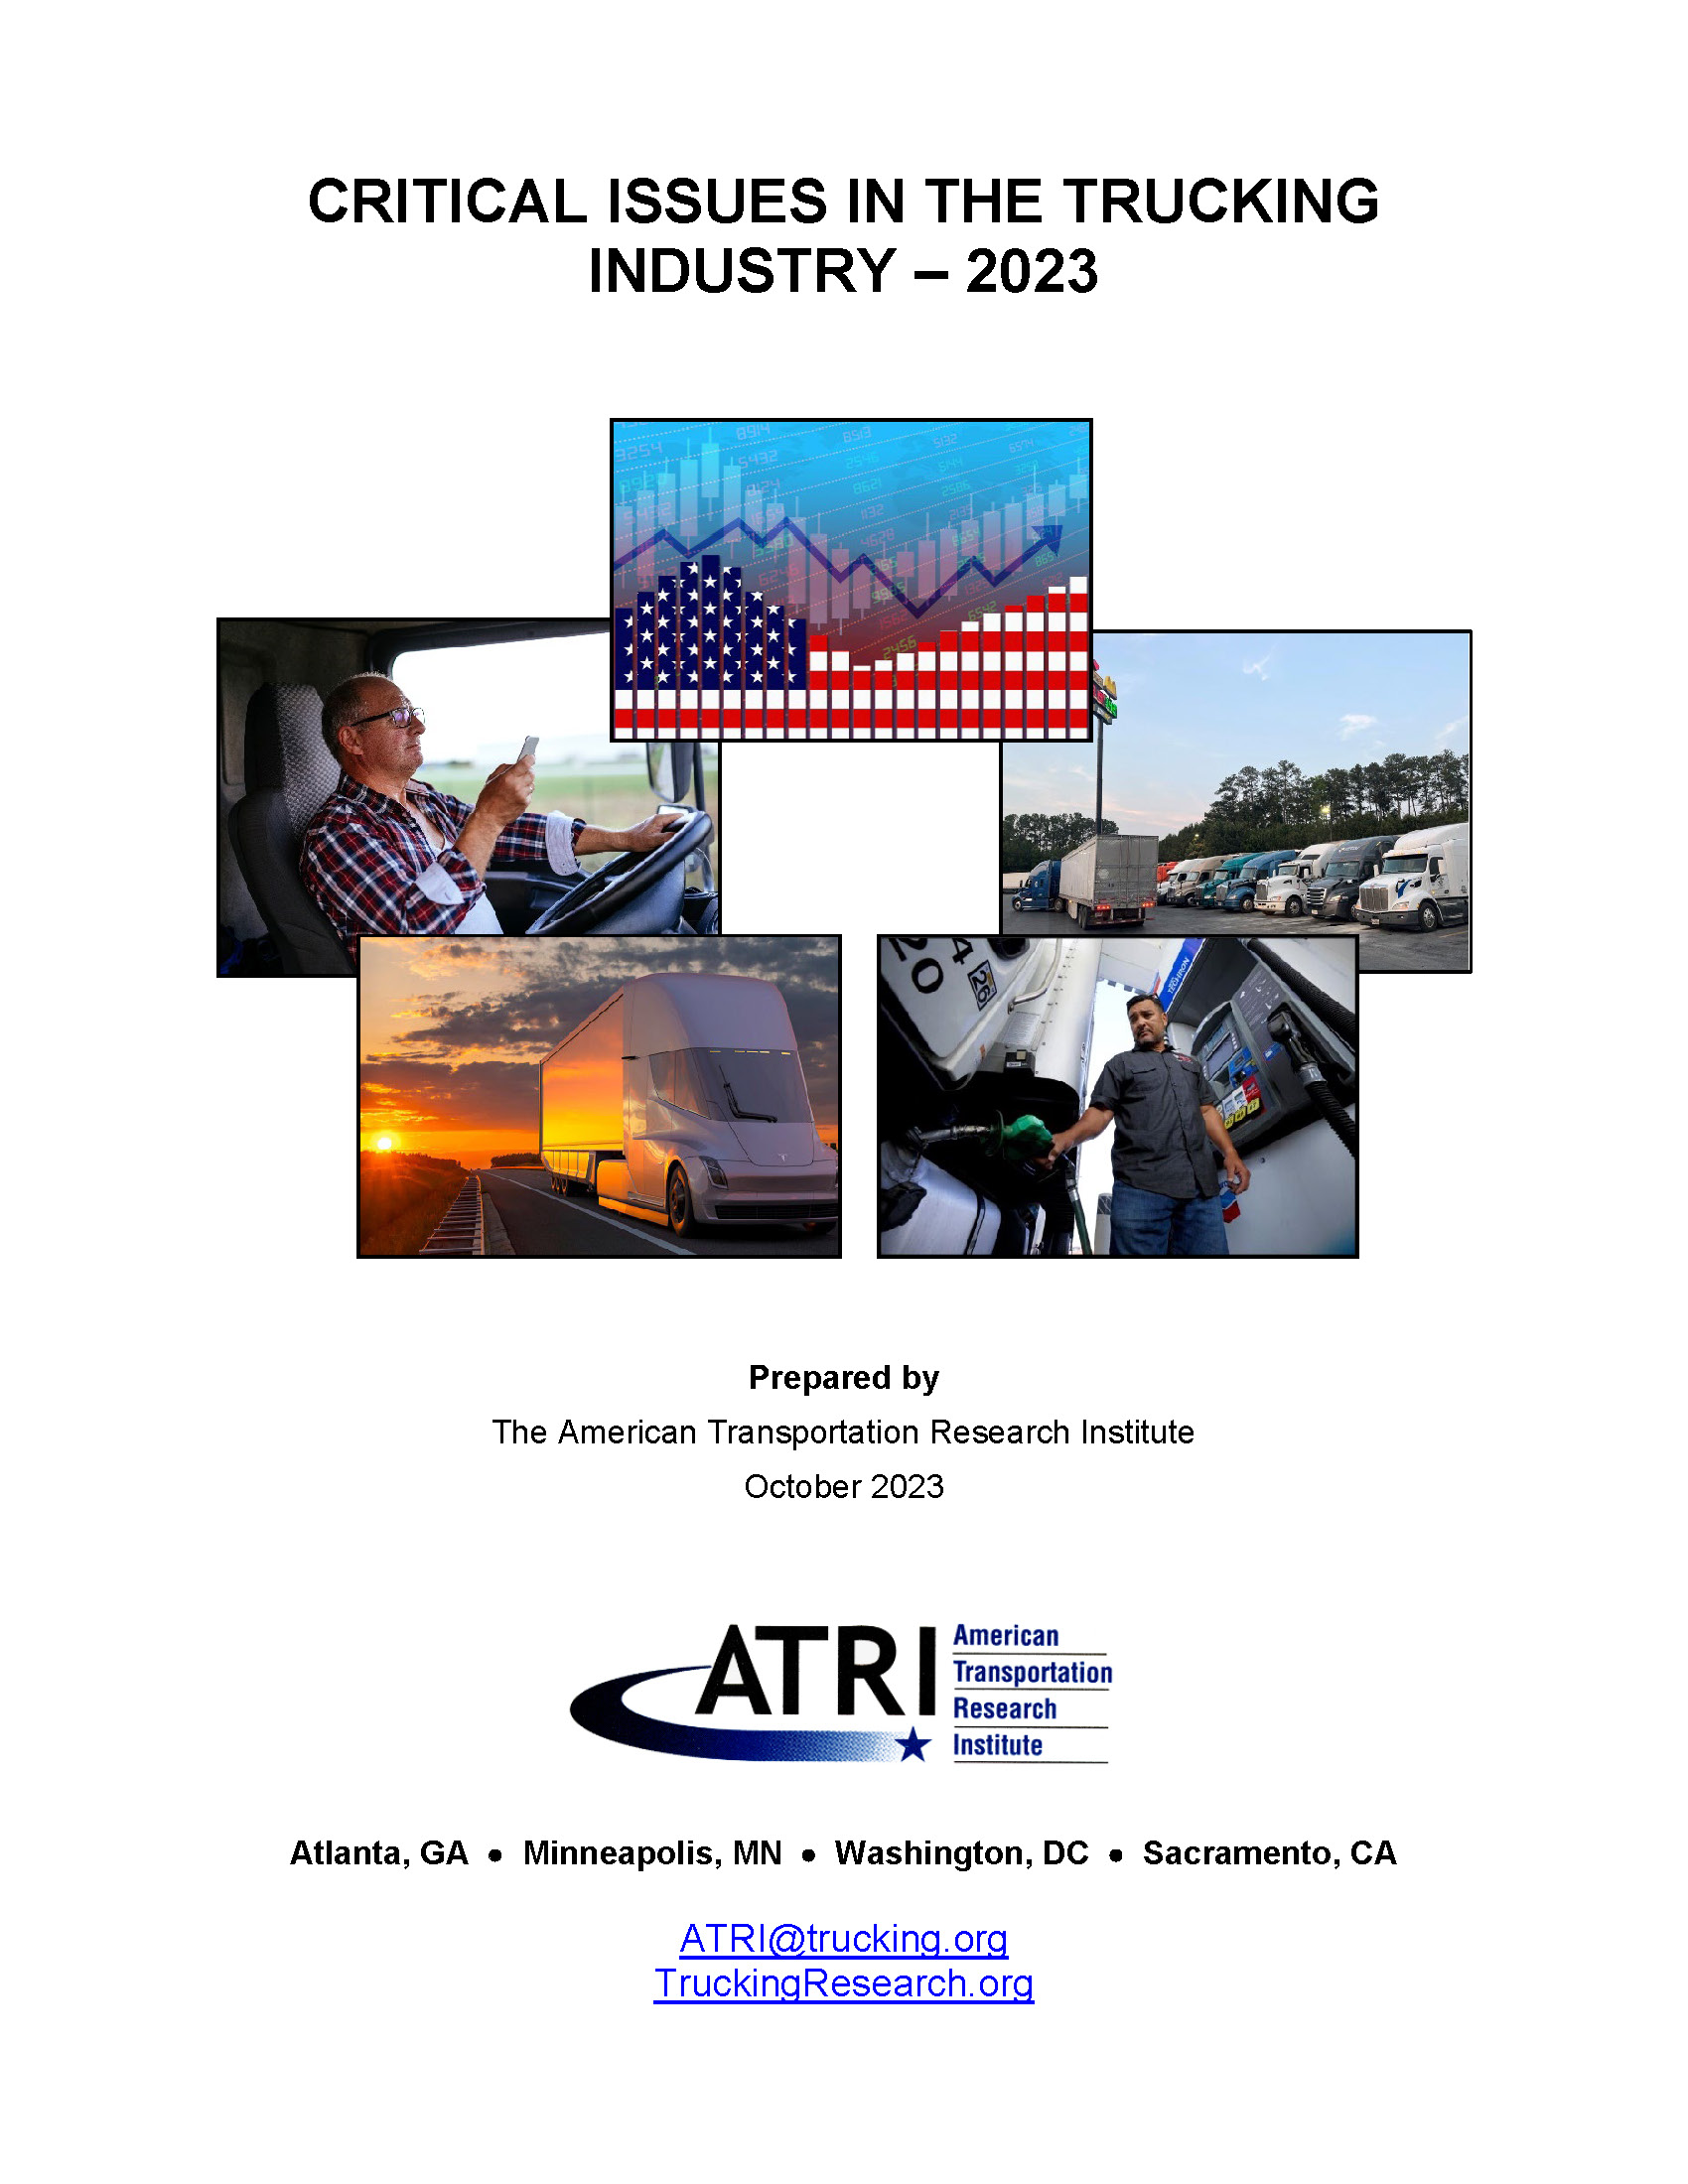 Critical Issues in the Trucking Industry Cover